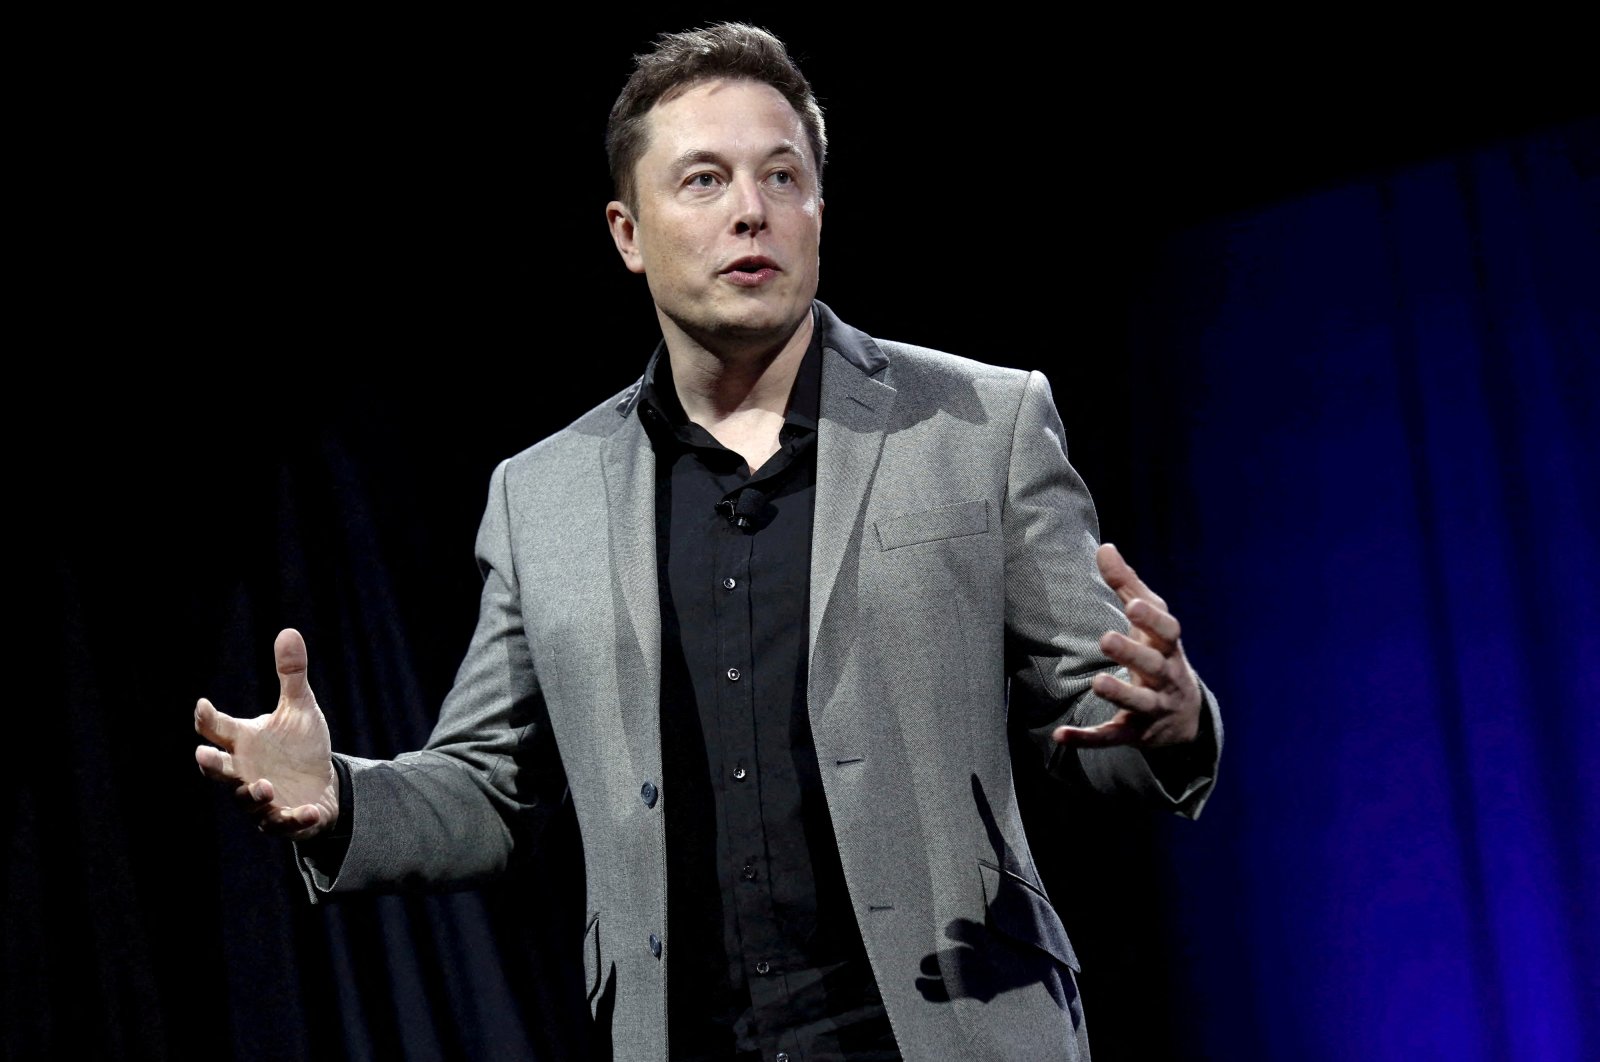 Musk wants Tesla jobs cut by 10%, feels 'super bad' about economy